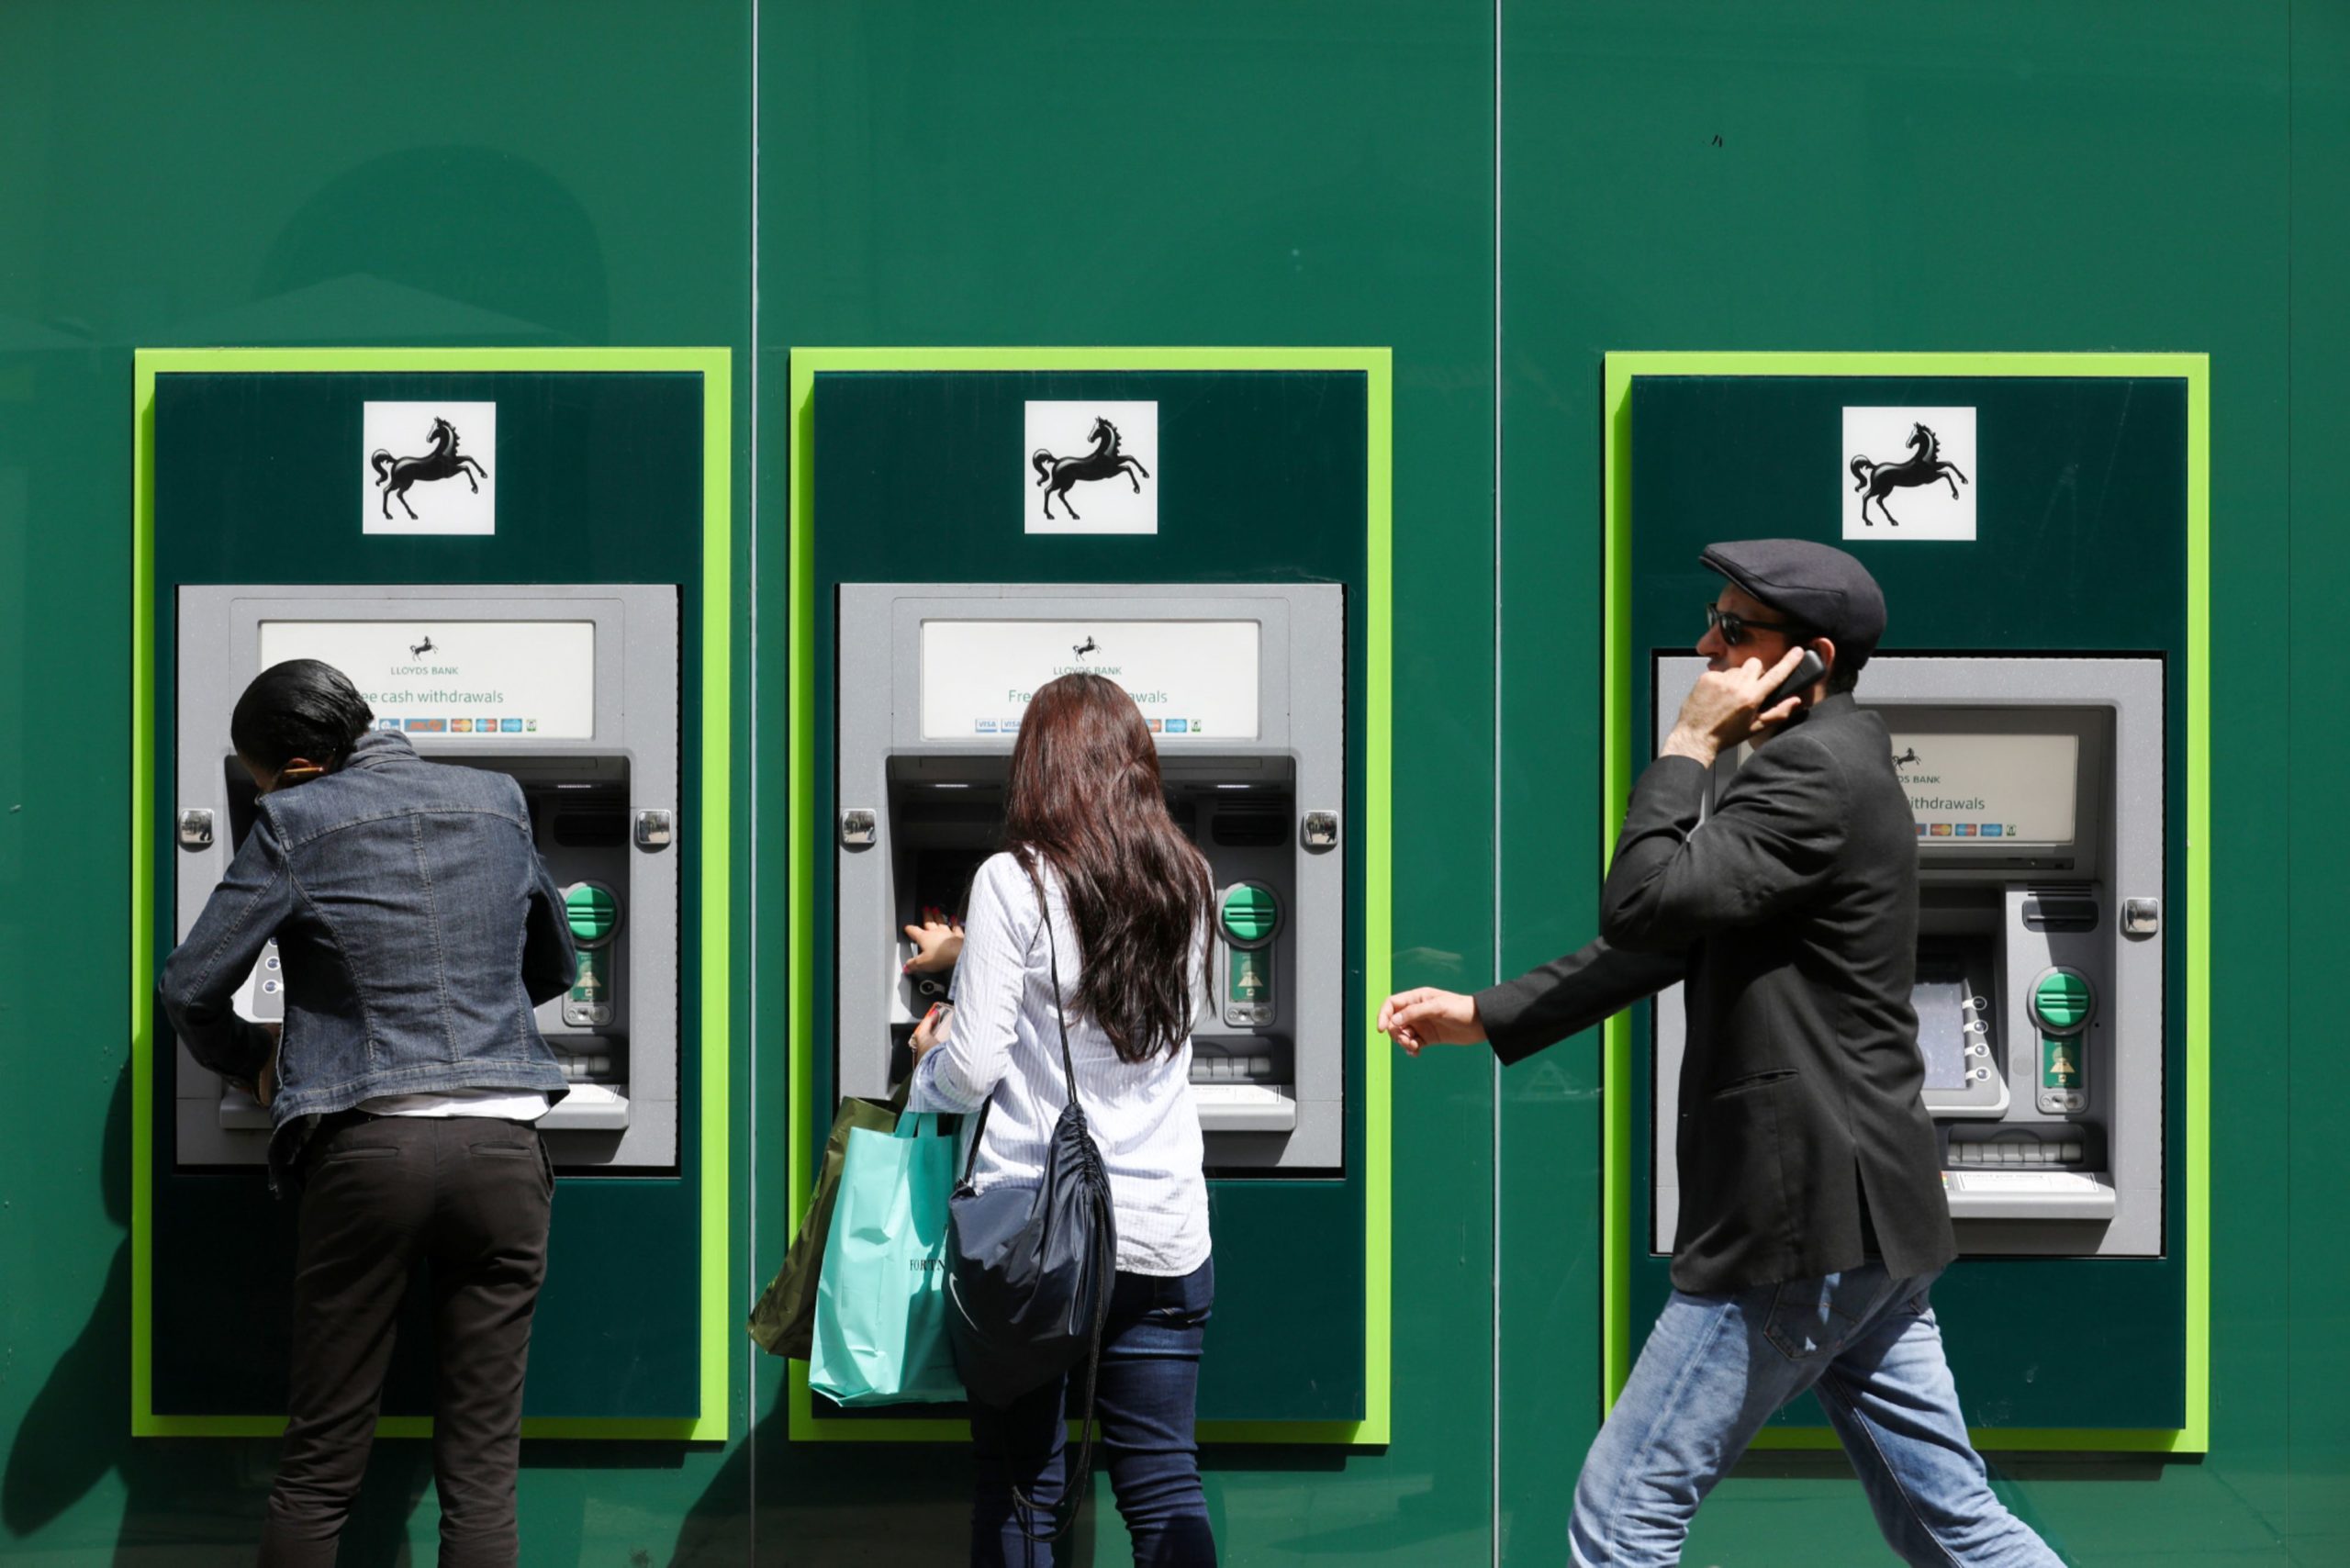 People use ATMs outside a Lloyds Bank branch in London, U.K., on Wednesday, May 31, 2017. Luke MacGregor/Bloomberg